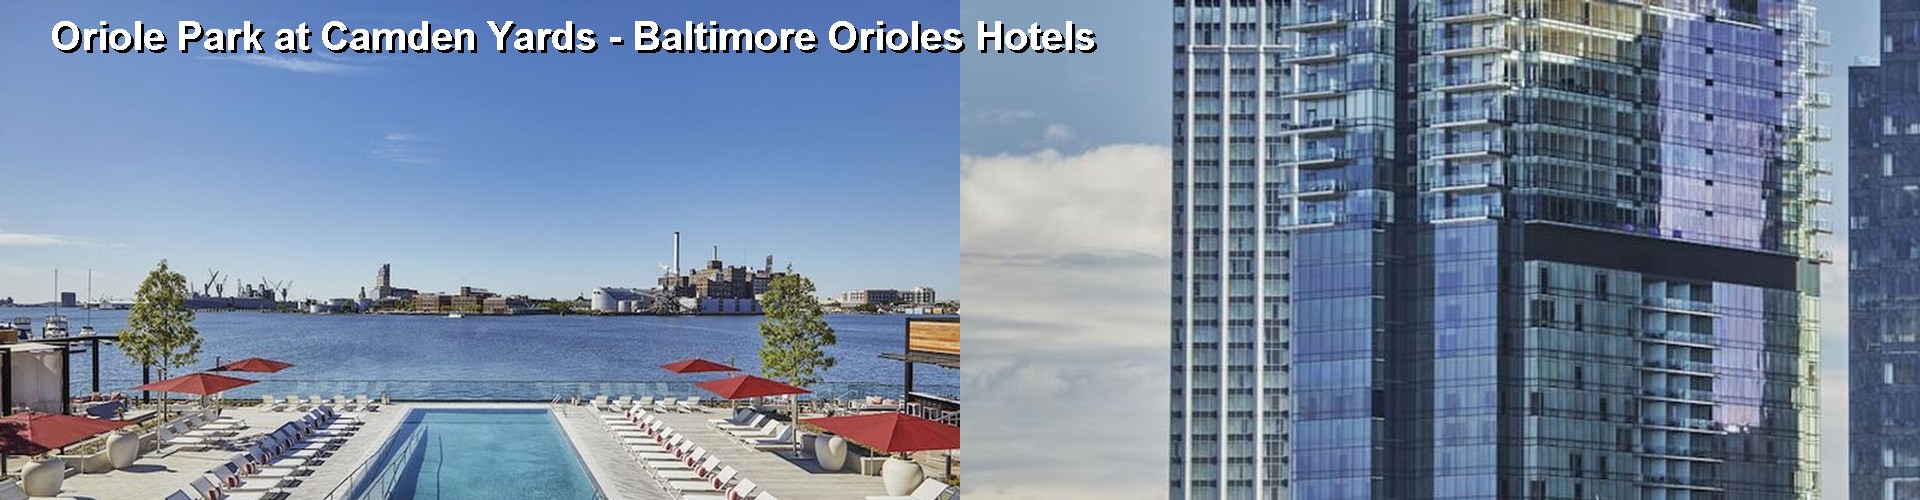 5 Best Hotels near Oriole Park at Camden Yards - Baltimore Orioles